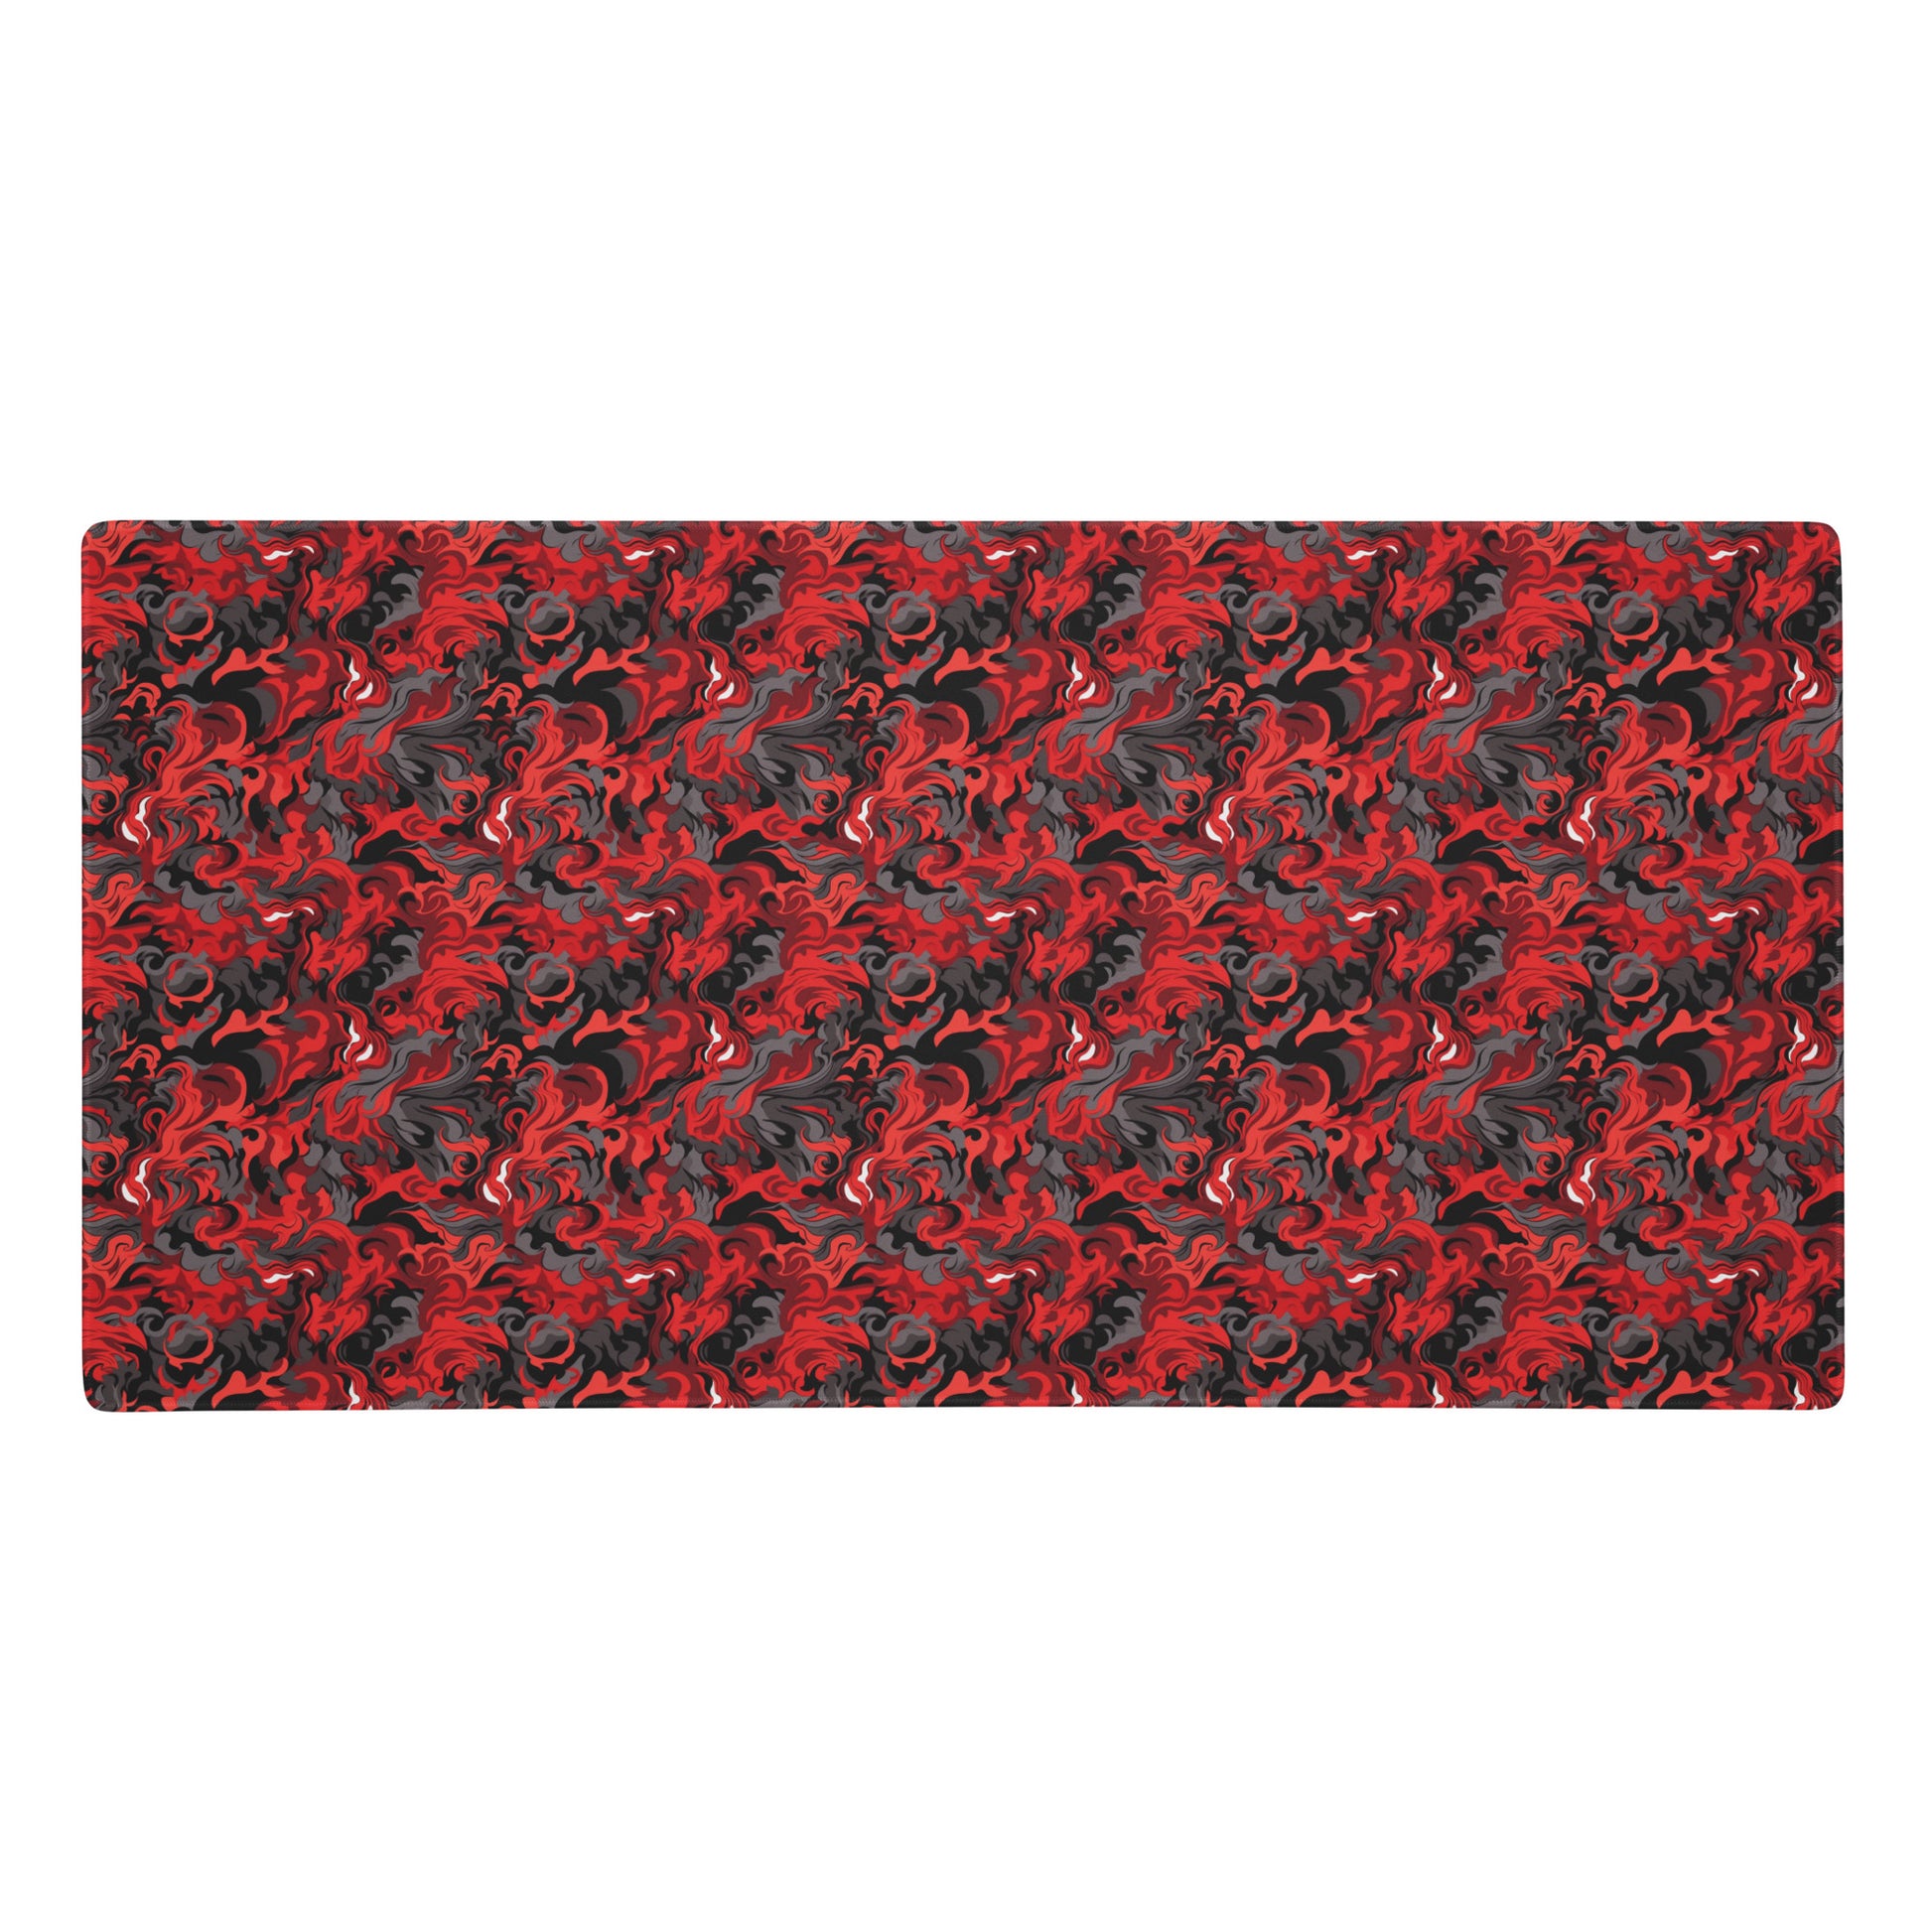 A 36" x 18" desk pad with a black and red camo pattern.